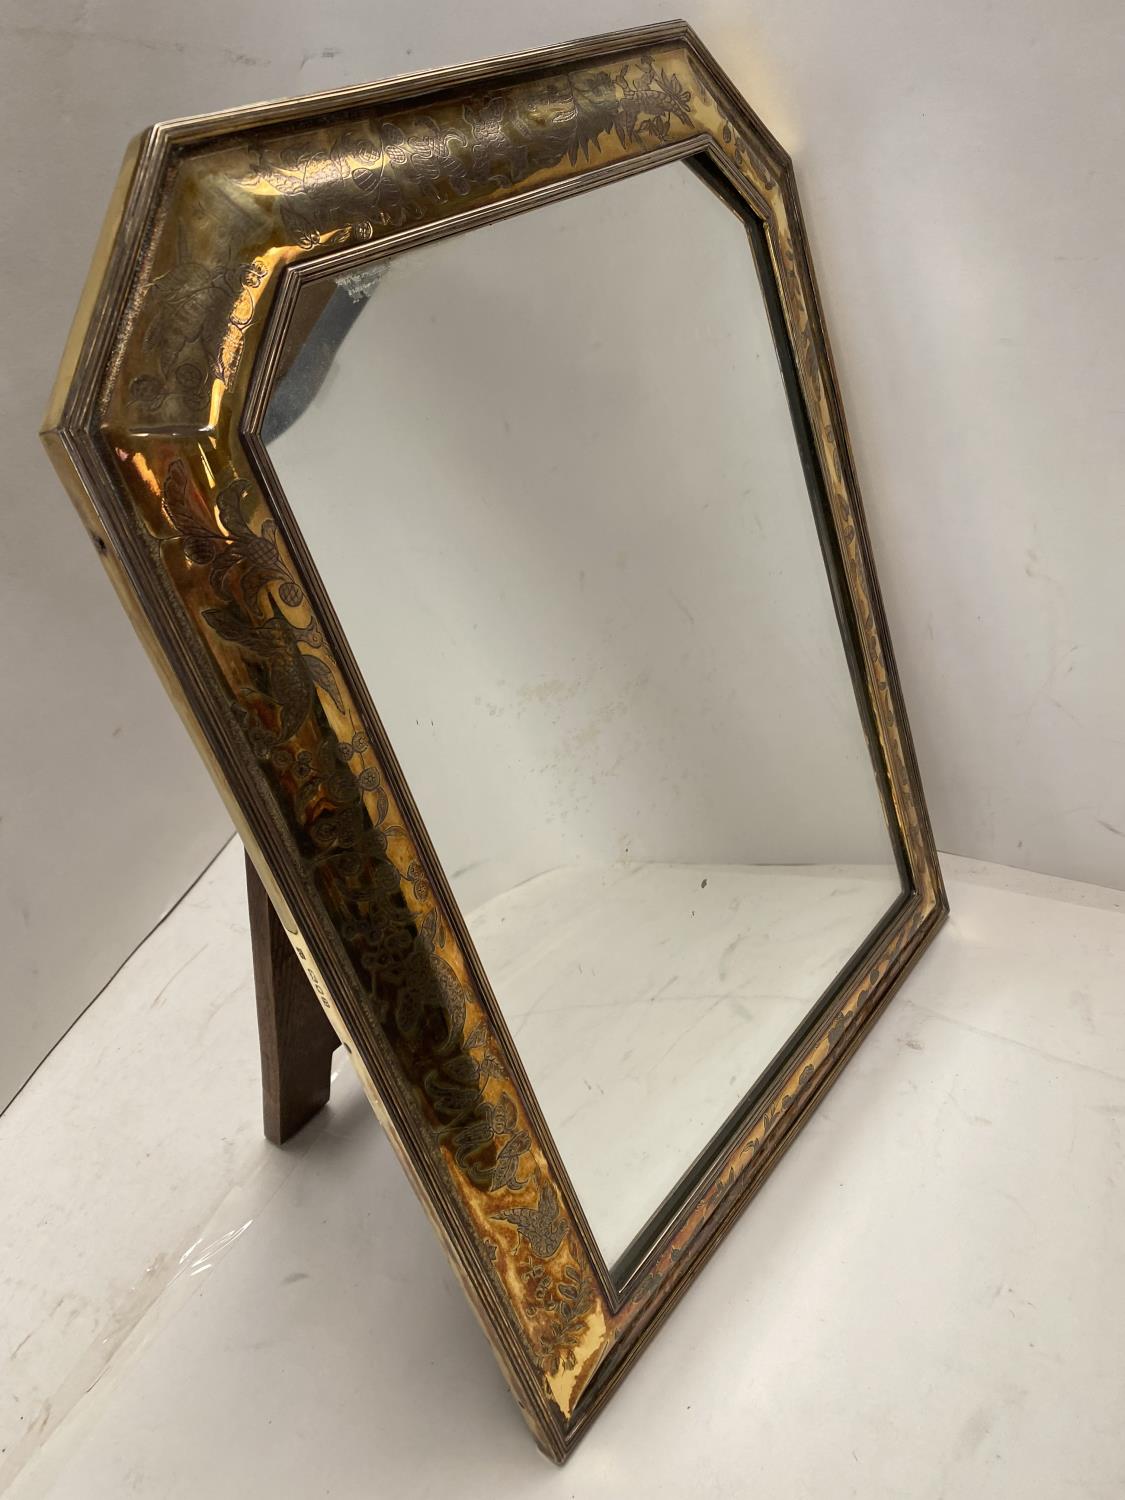 Hallmarked silver mirror set within an engraved frame, overall 45.5 long, x 36 cm wide, backed on - Image 6 of 6